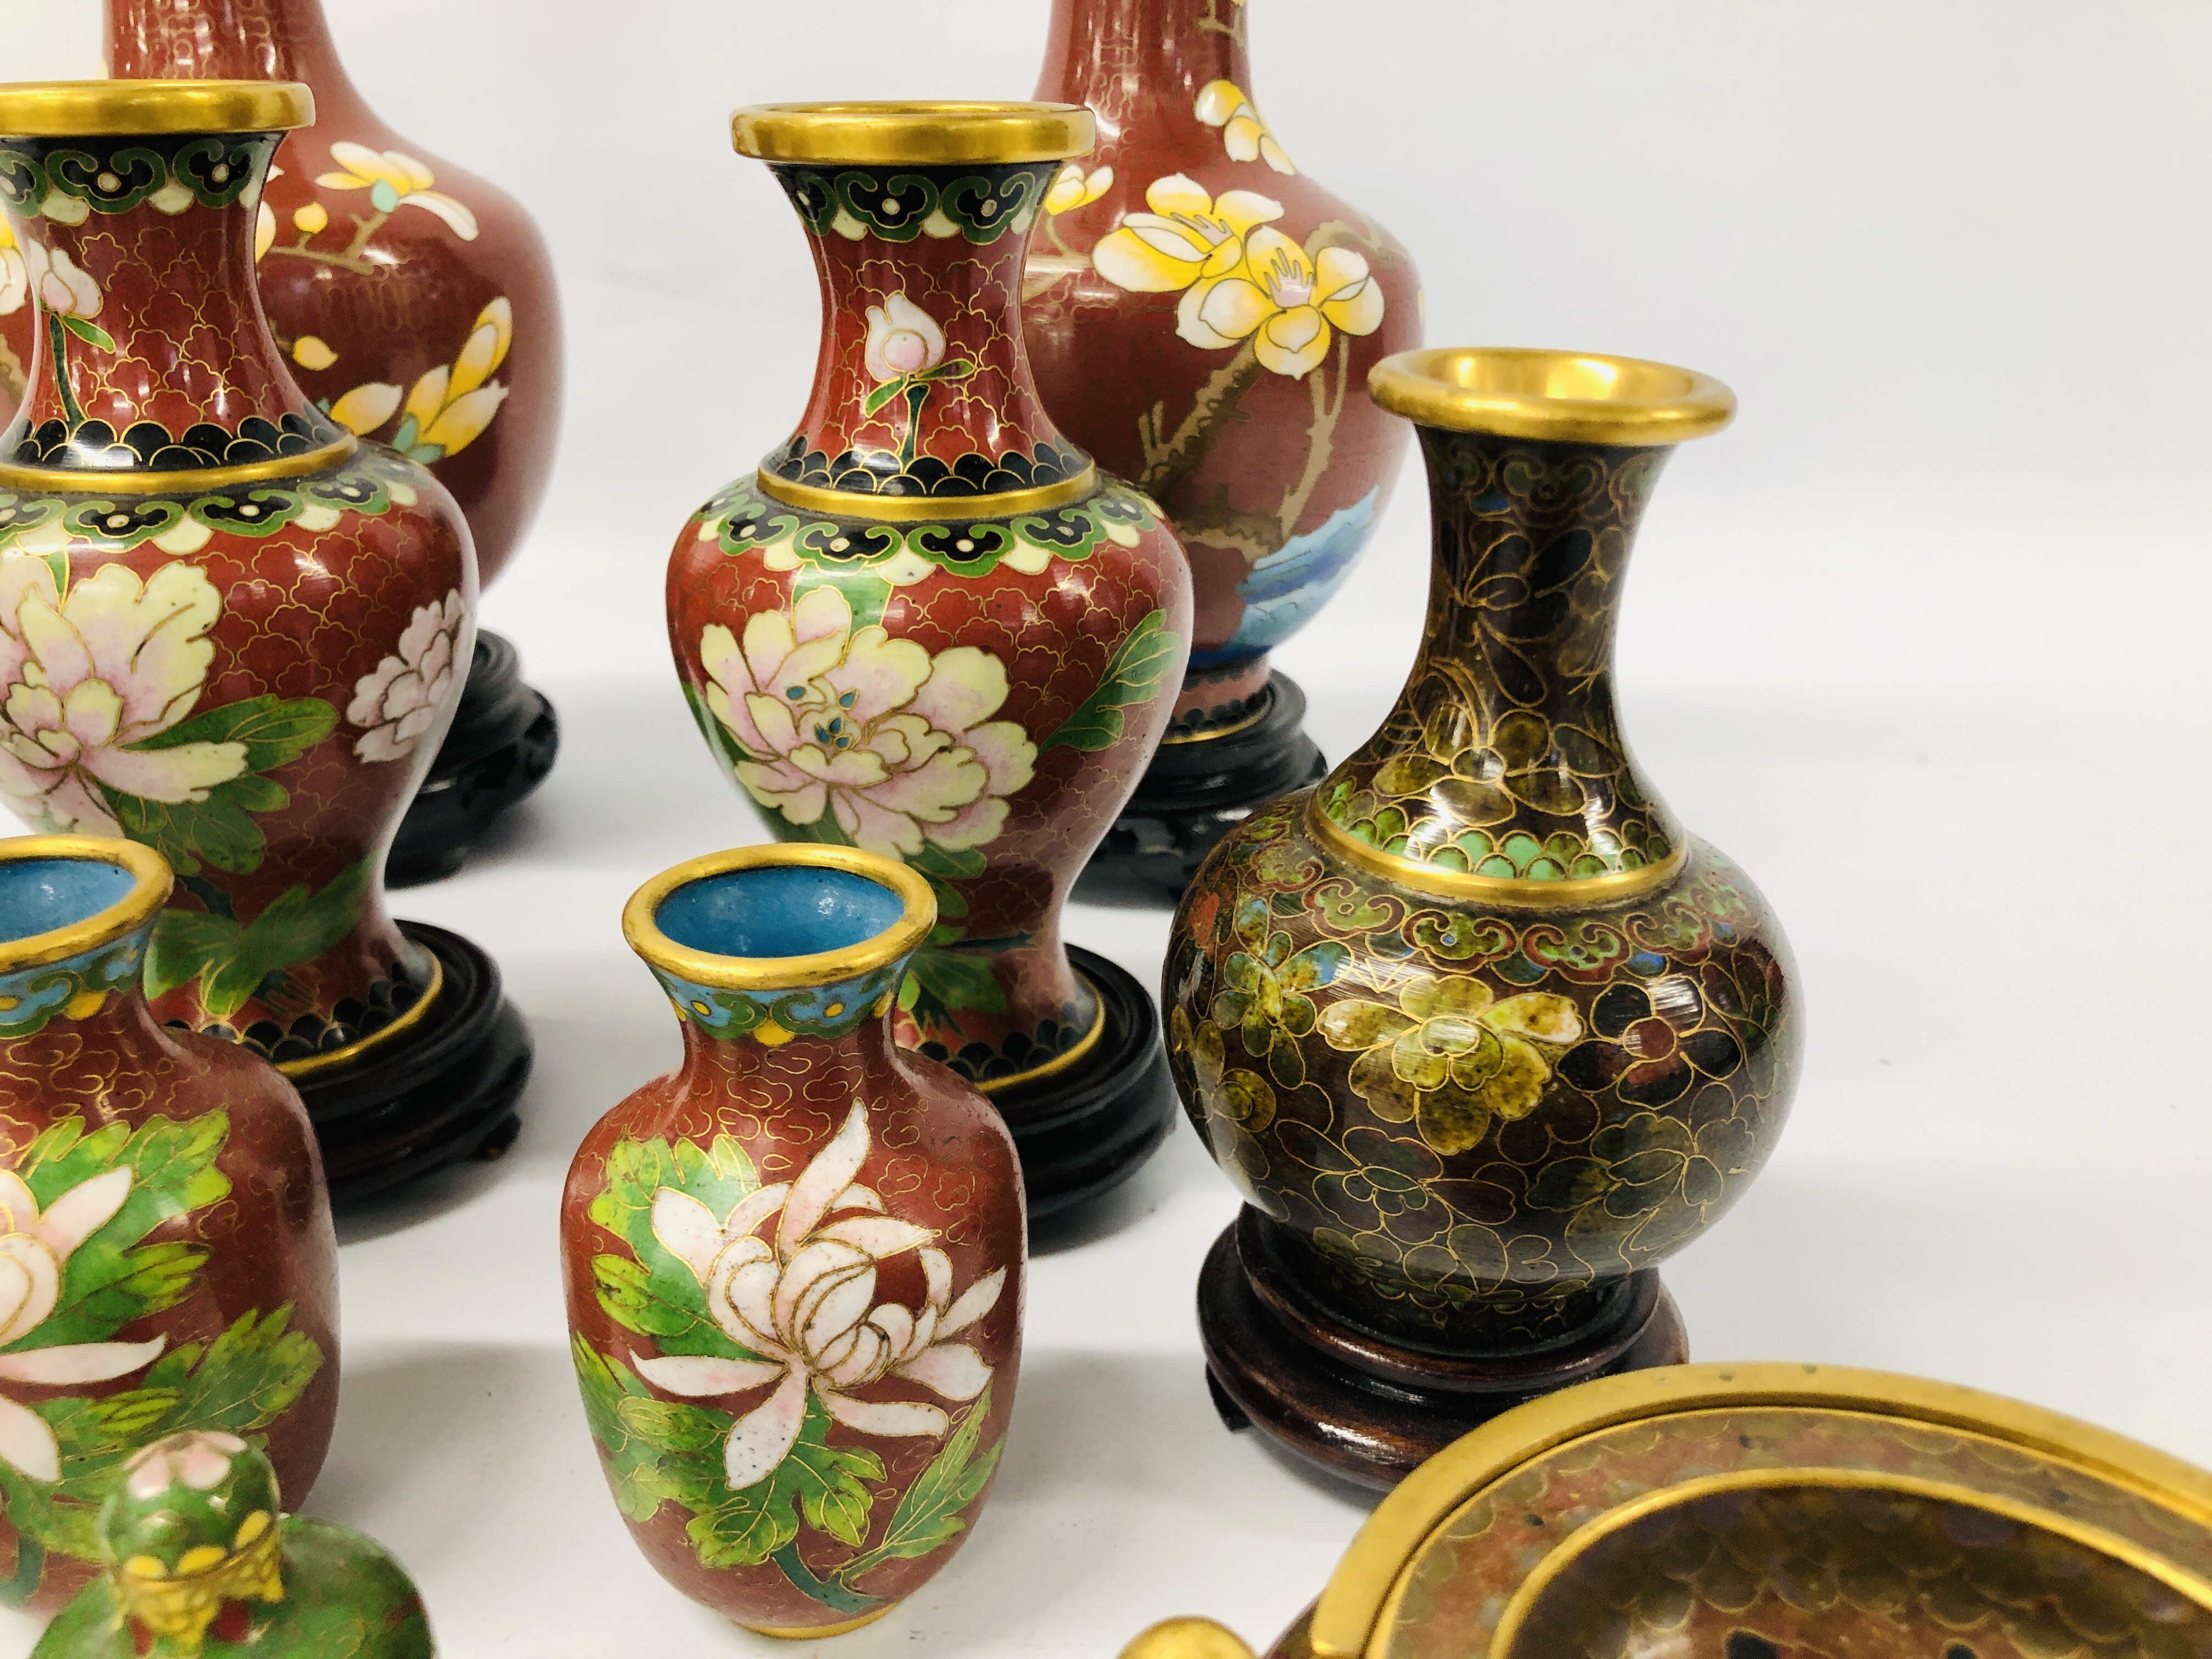 COLLECTION OF CLOISONNE VASES SOME HAVING CARVED HARDWOOD STANDS 10 IN TOTAL ALONG WITH A CLOISONNE - Image 4 of 7